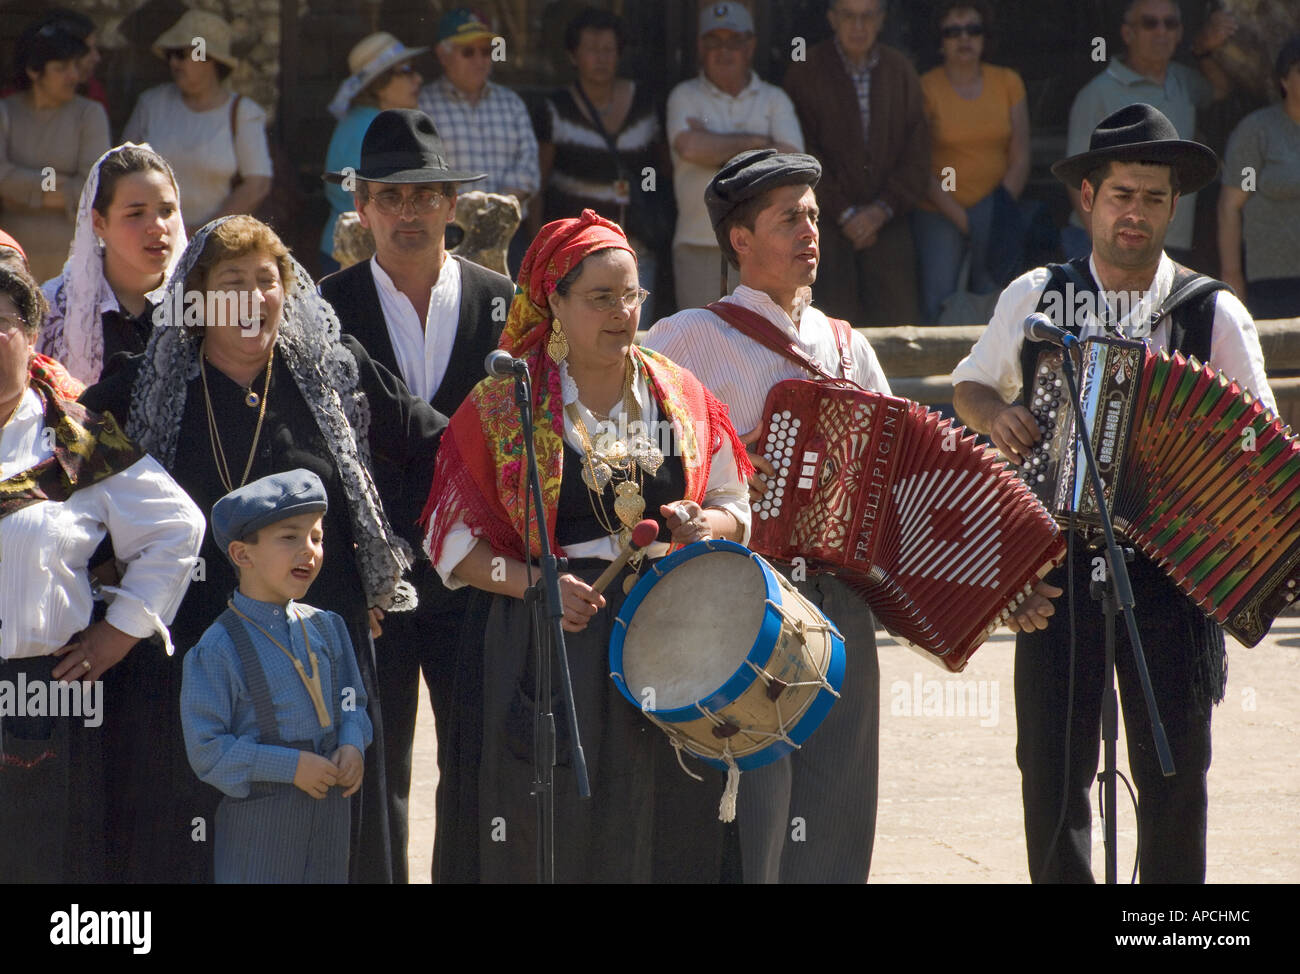 musicians from the folkdancing troupe from Pedralva, near Coimbra in the Região Bairradinha region (a performance at Alte in the Algarve ) Stock Photo